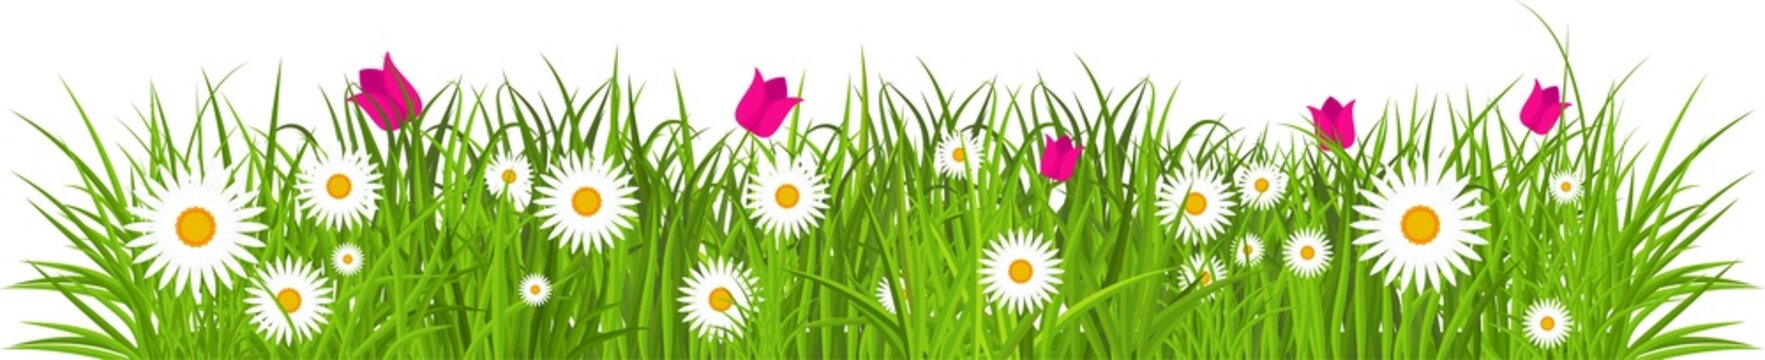 Grass, tulips and daises. Green flowering meadow. Spring and summer